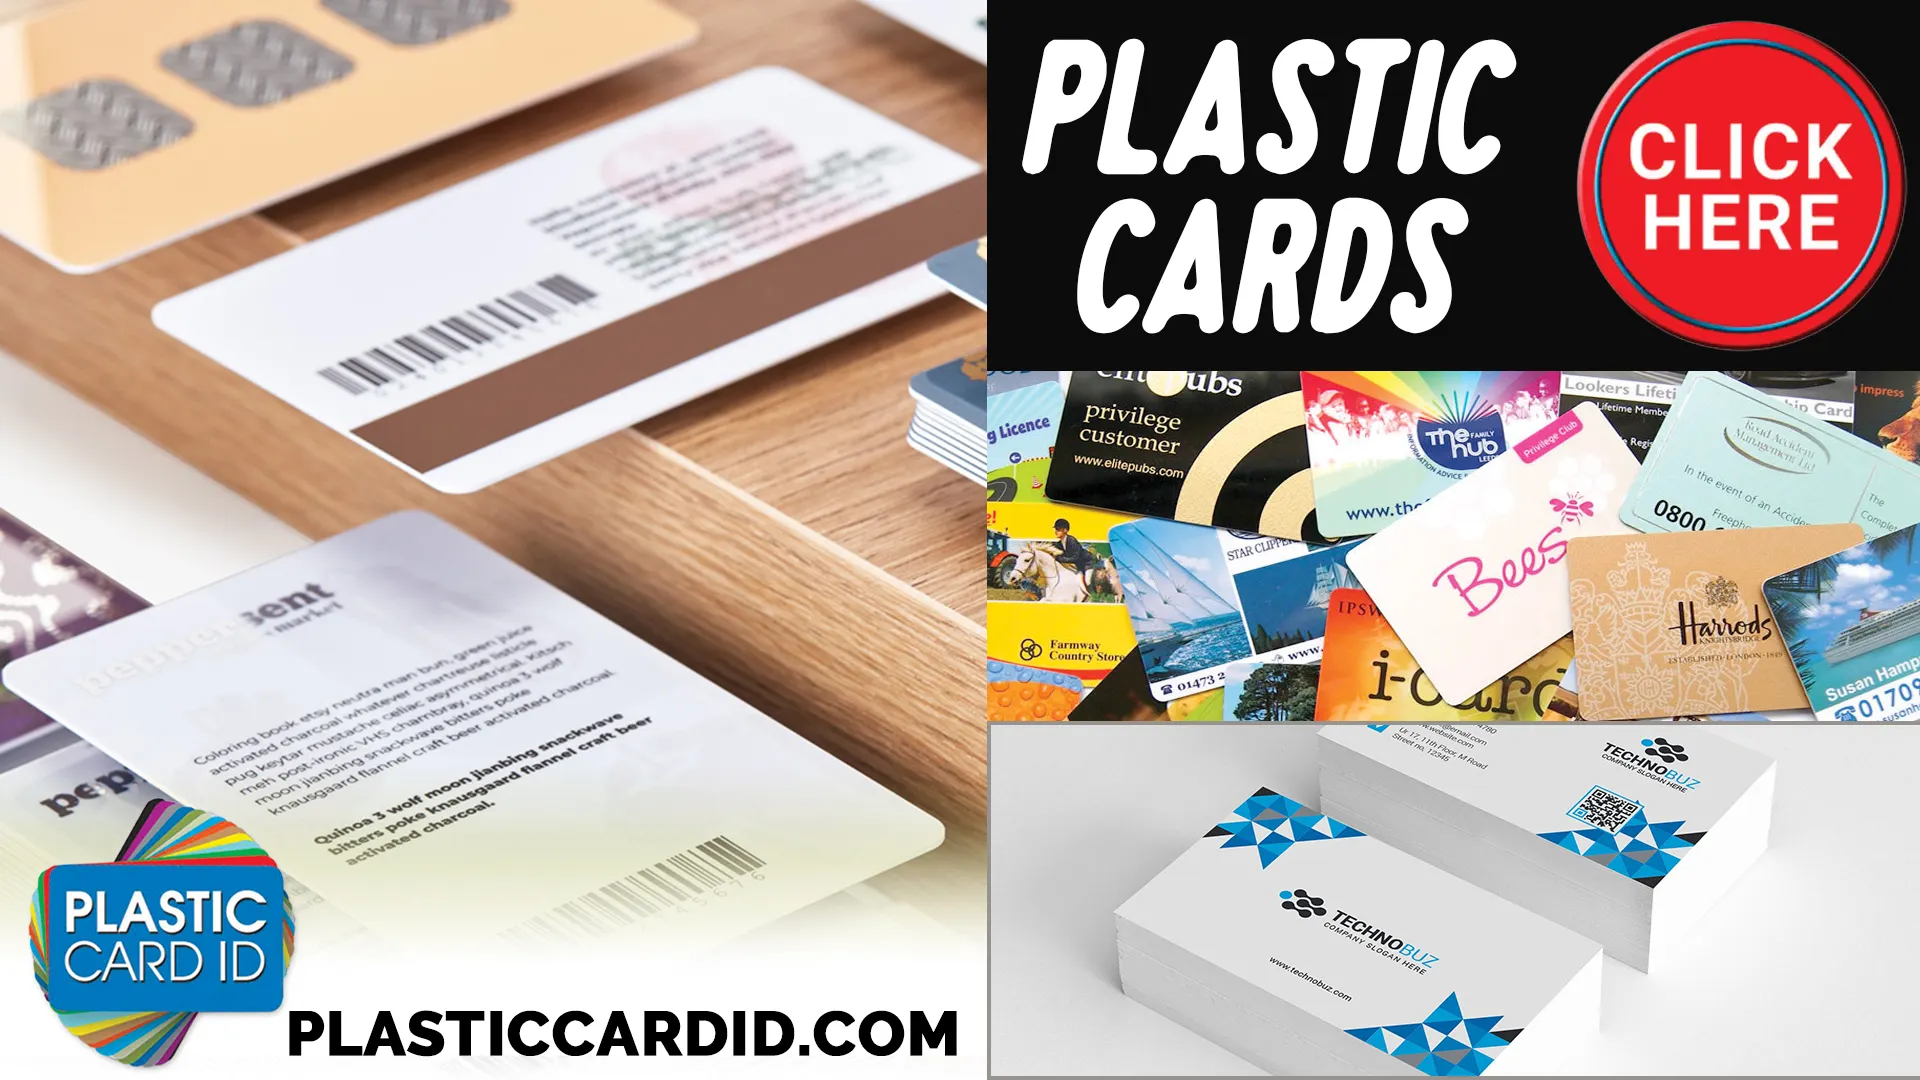 Maximizing Value: The Ongoing Support and Service from Plastic Card ID
